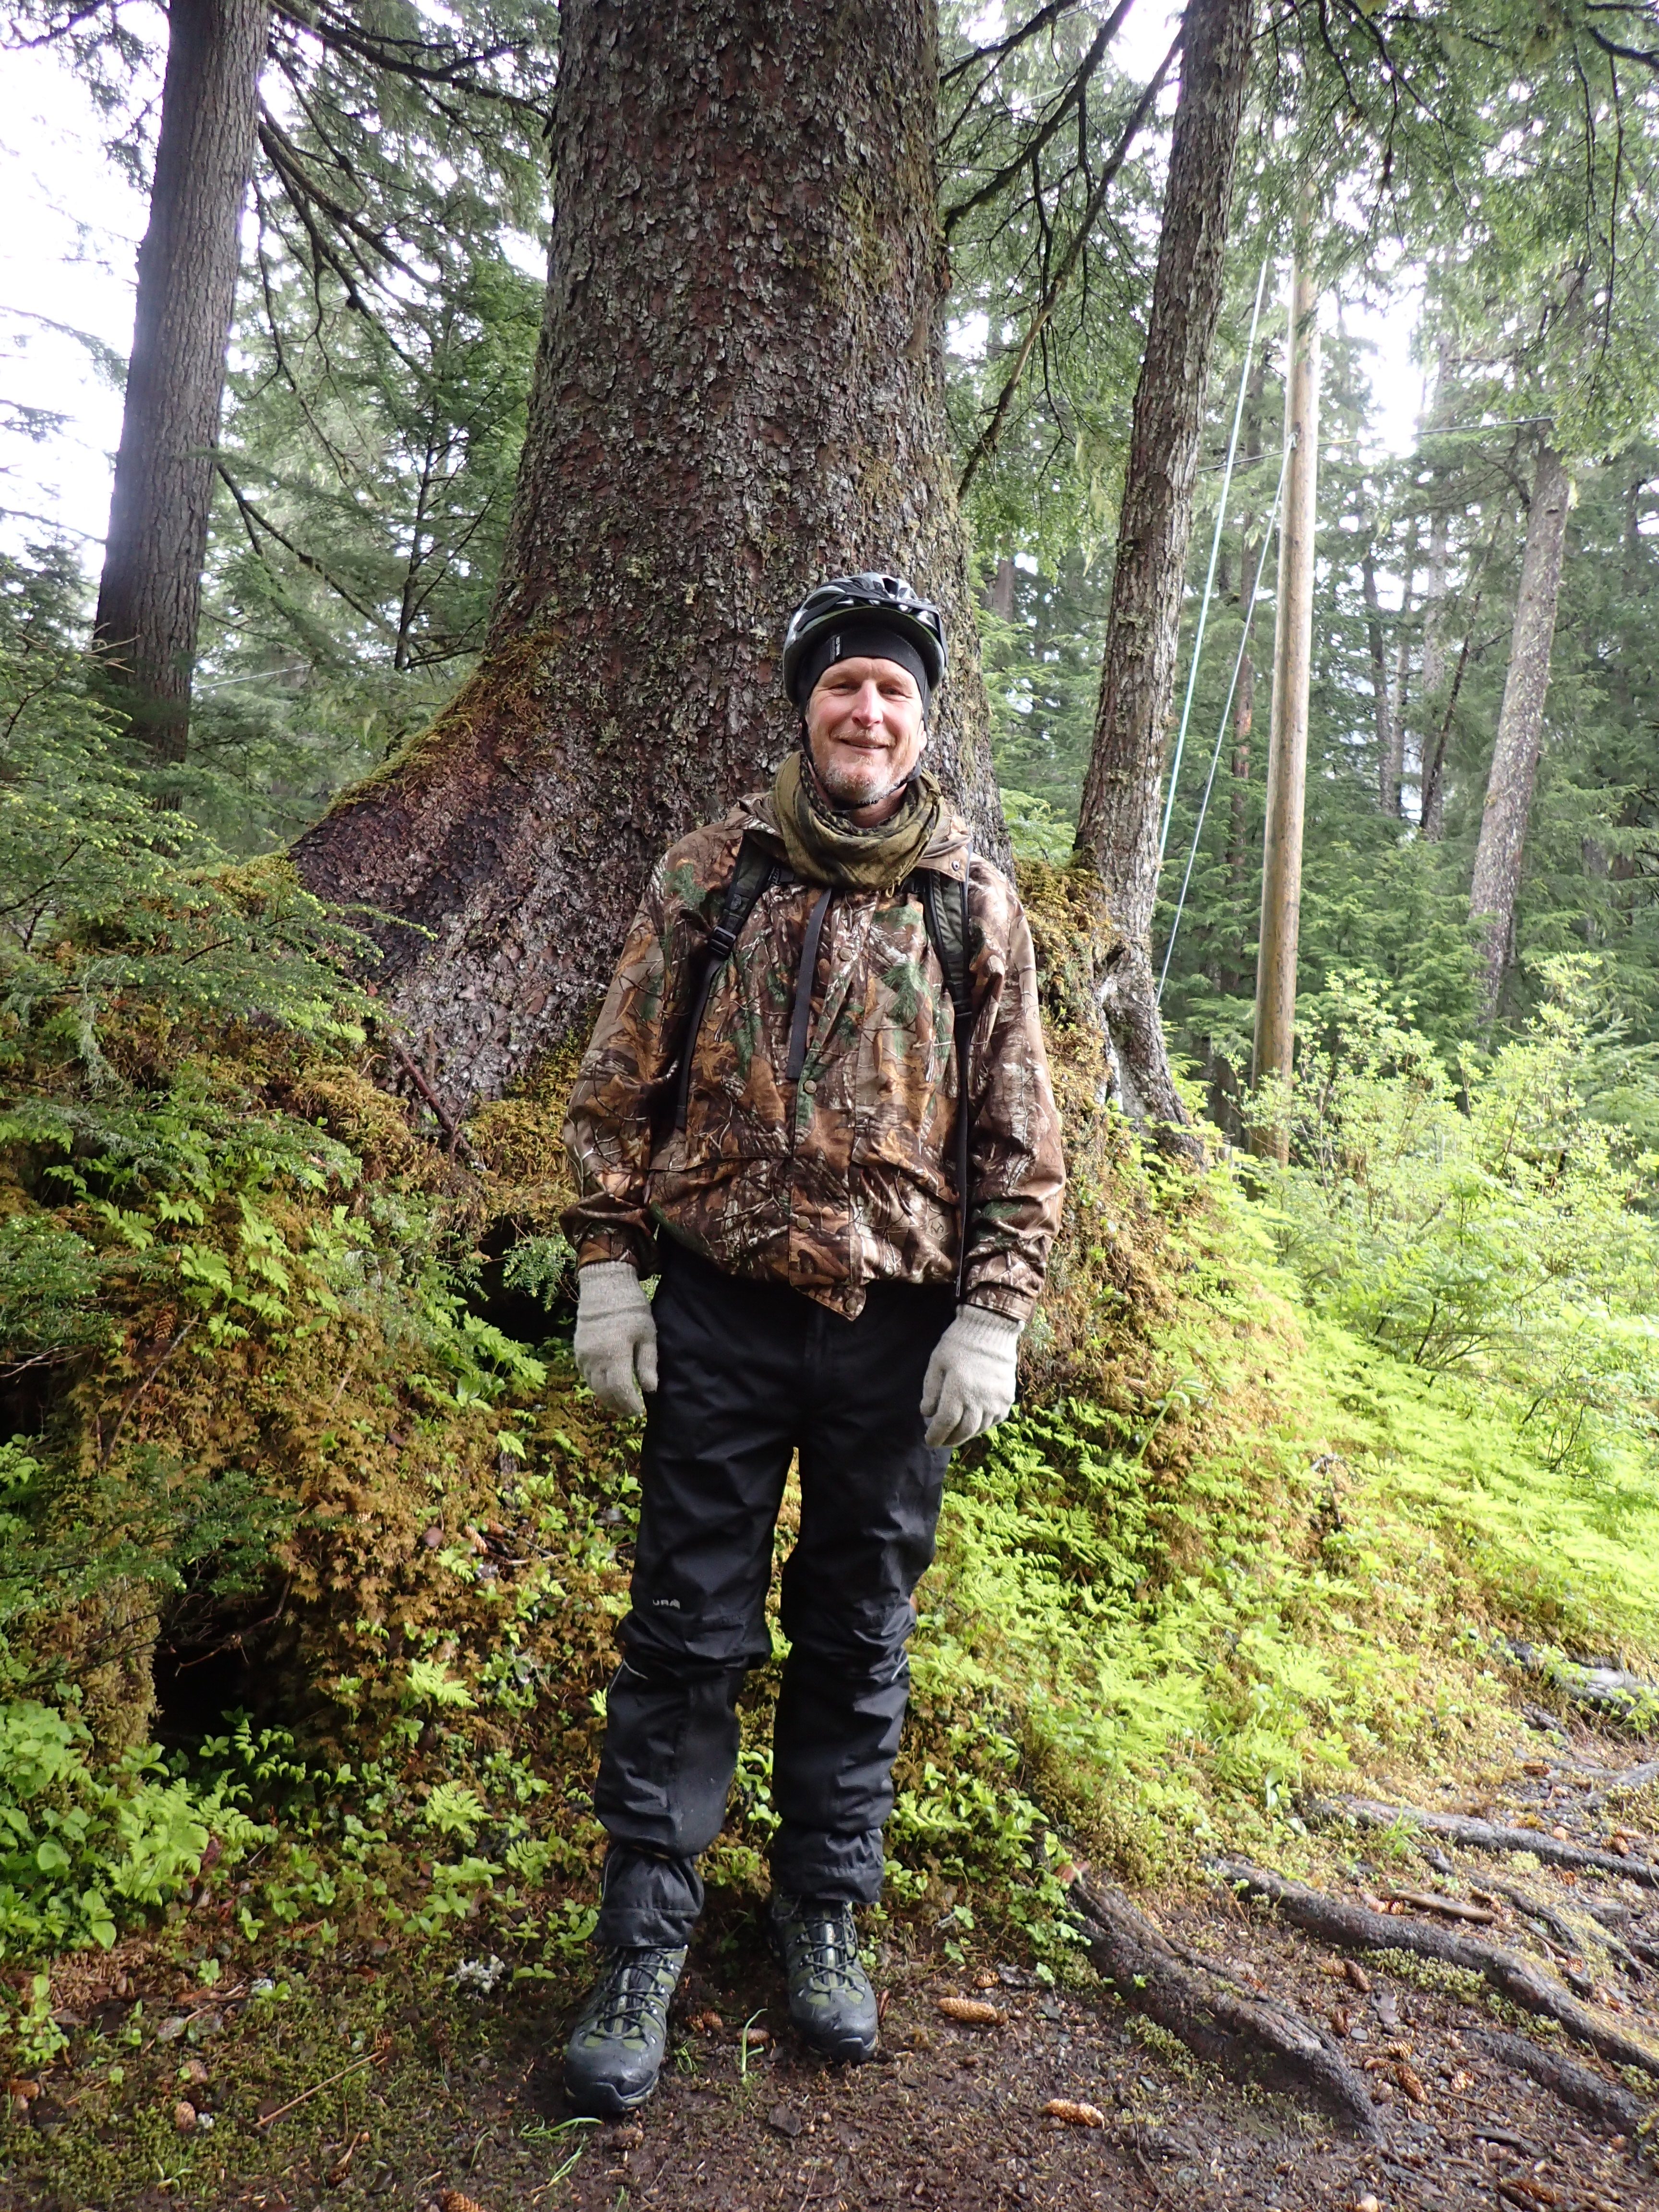 I encountered this giant sitka spruce on our bike ride in Juneau. I'm a tree guy, and I love trees. What can I say?